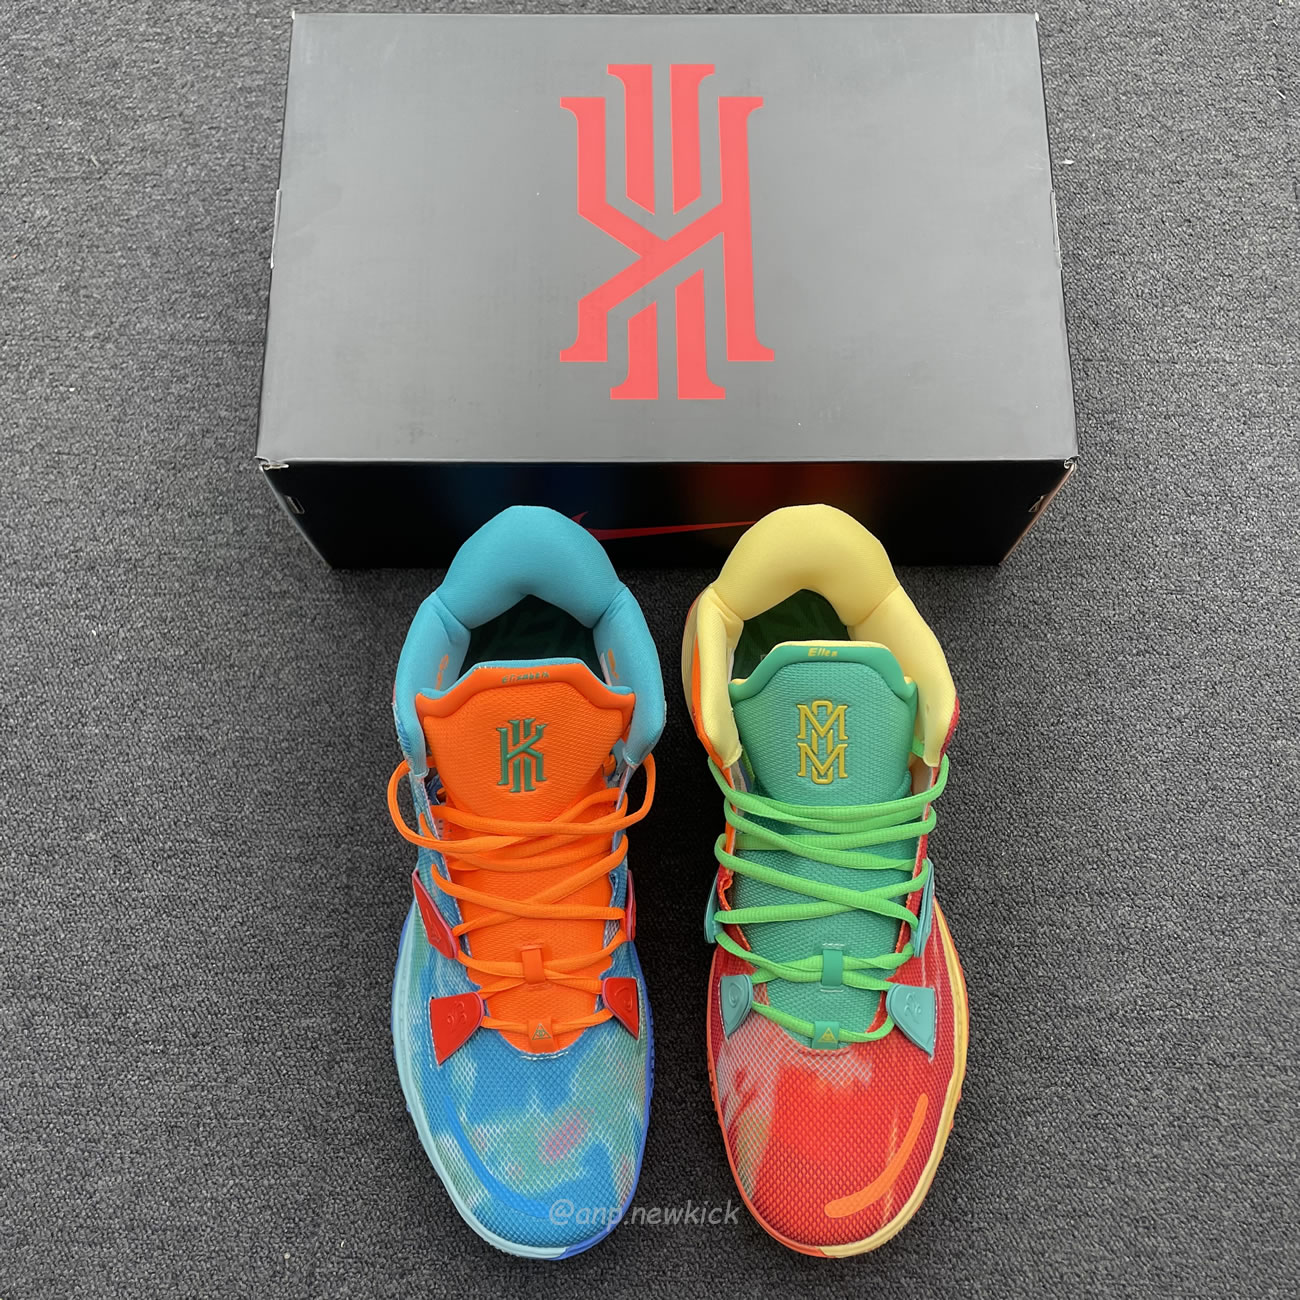 Nike Kyrie 7 Sneaker Room Fire And Water Do5360 900 (10) - newkick.org